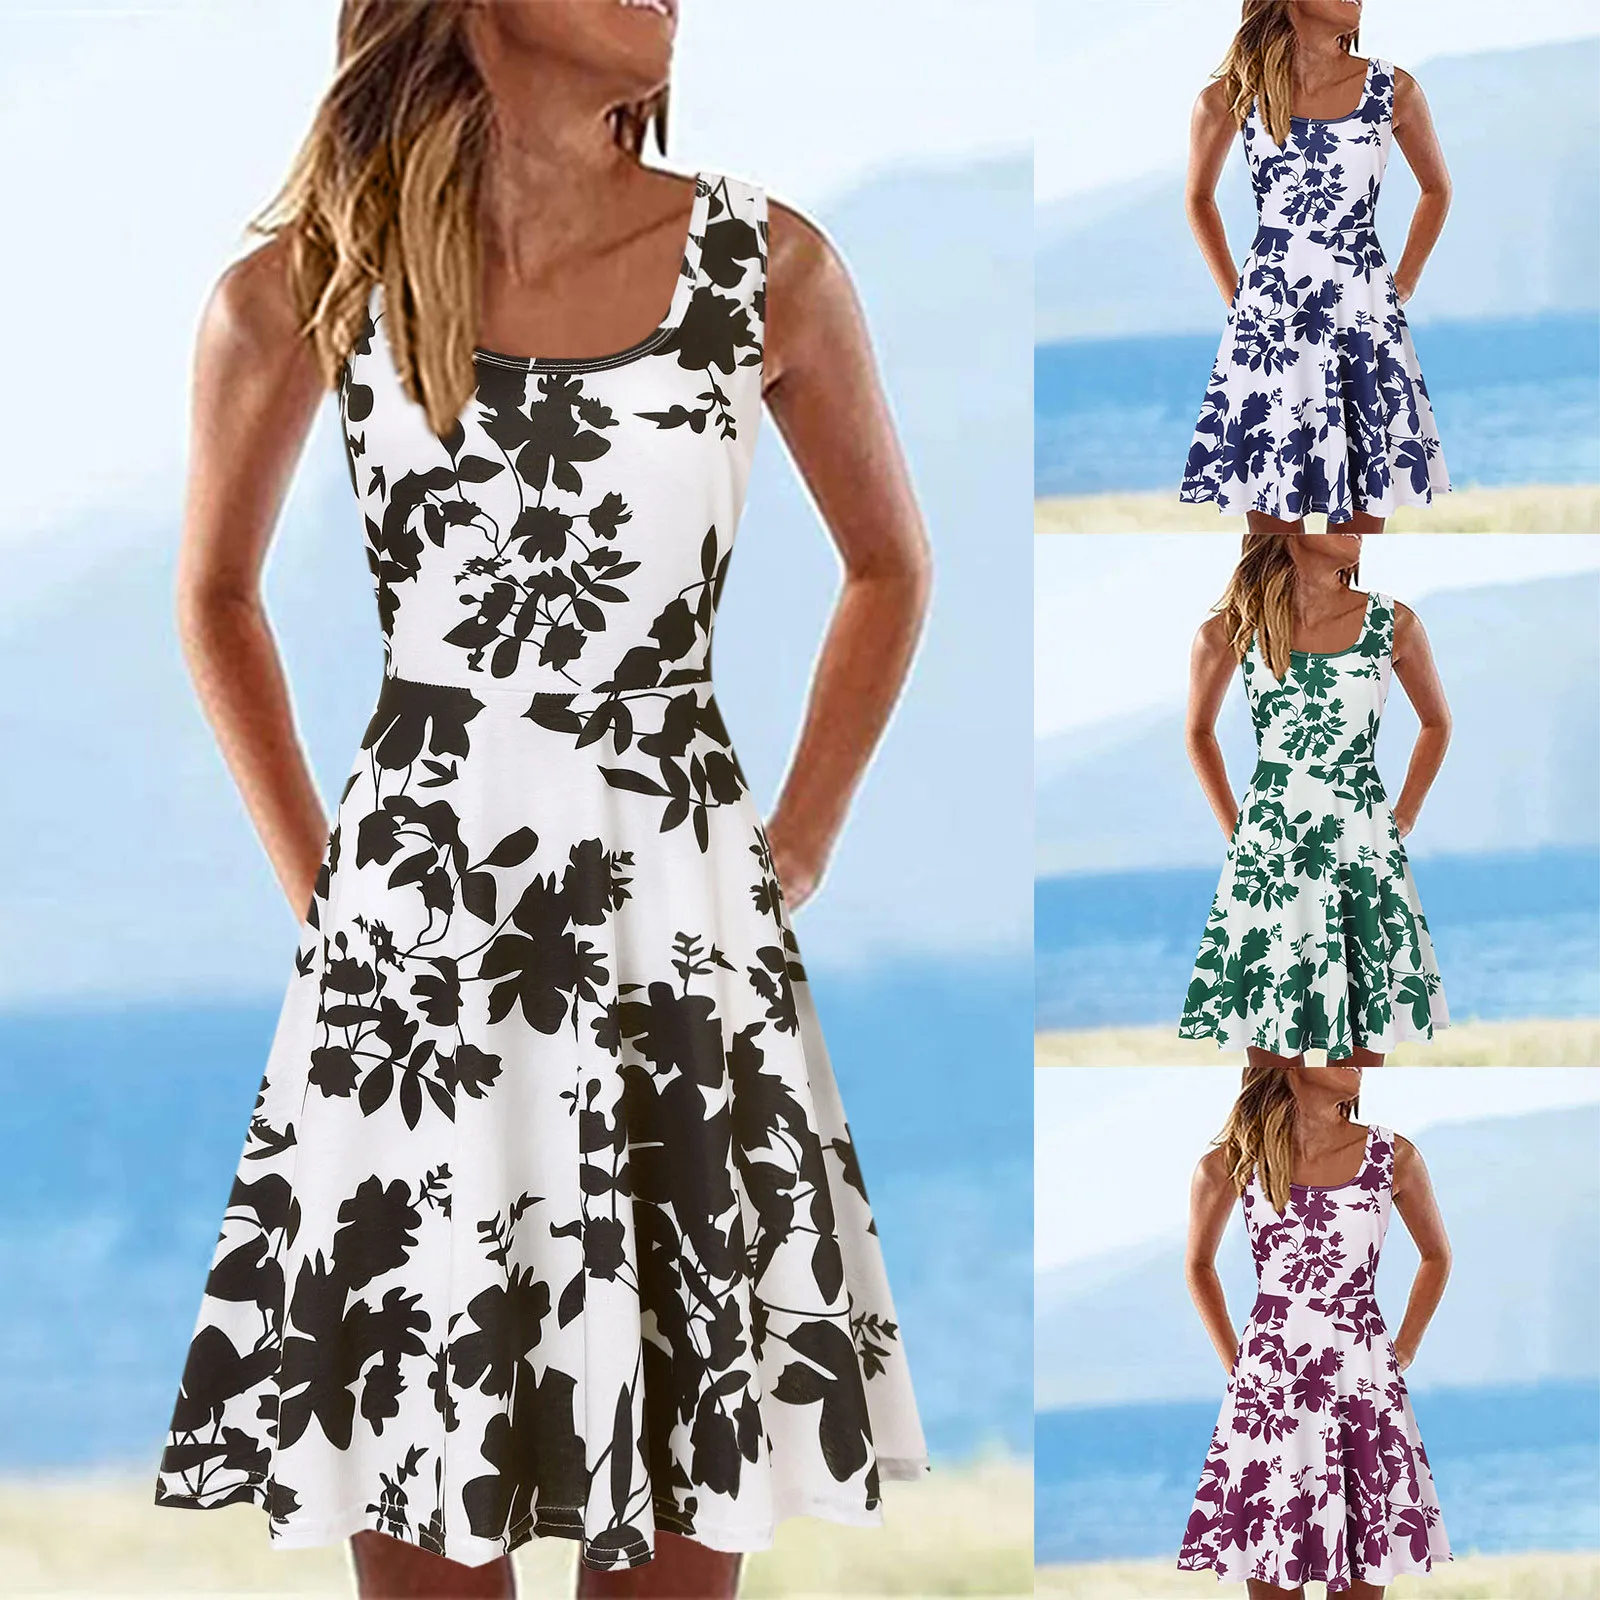 Backless Ladies Summer Dress Sexy Sleeveless U-Neck A-line Short Casual Sundress Floral Printed Loose Vintage Women Dresses